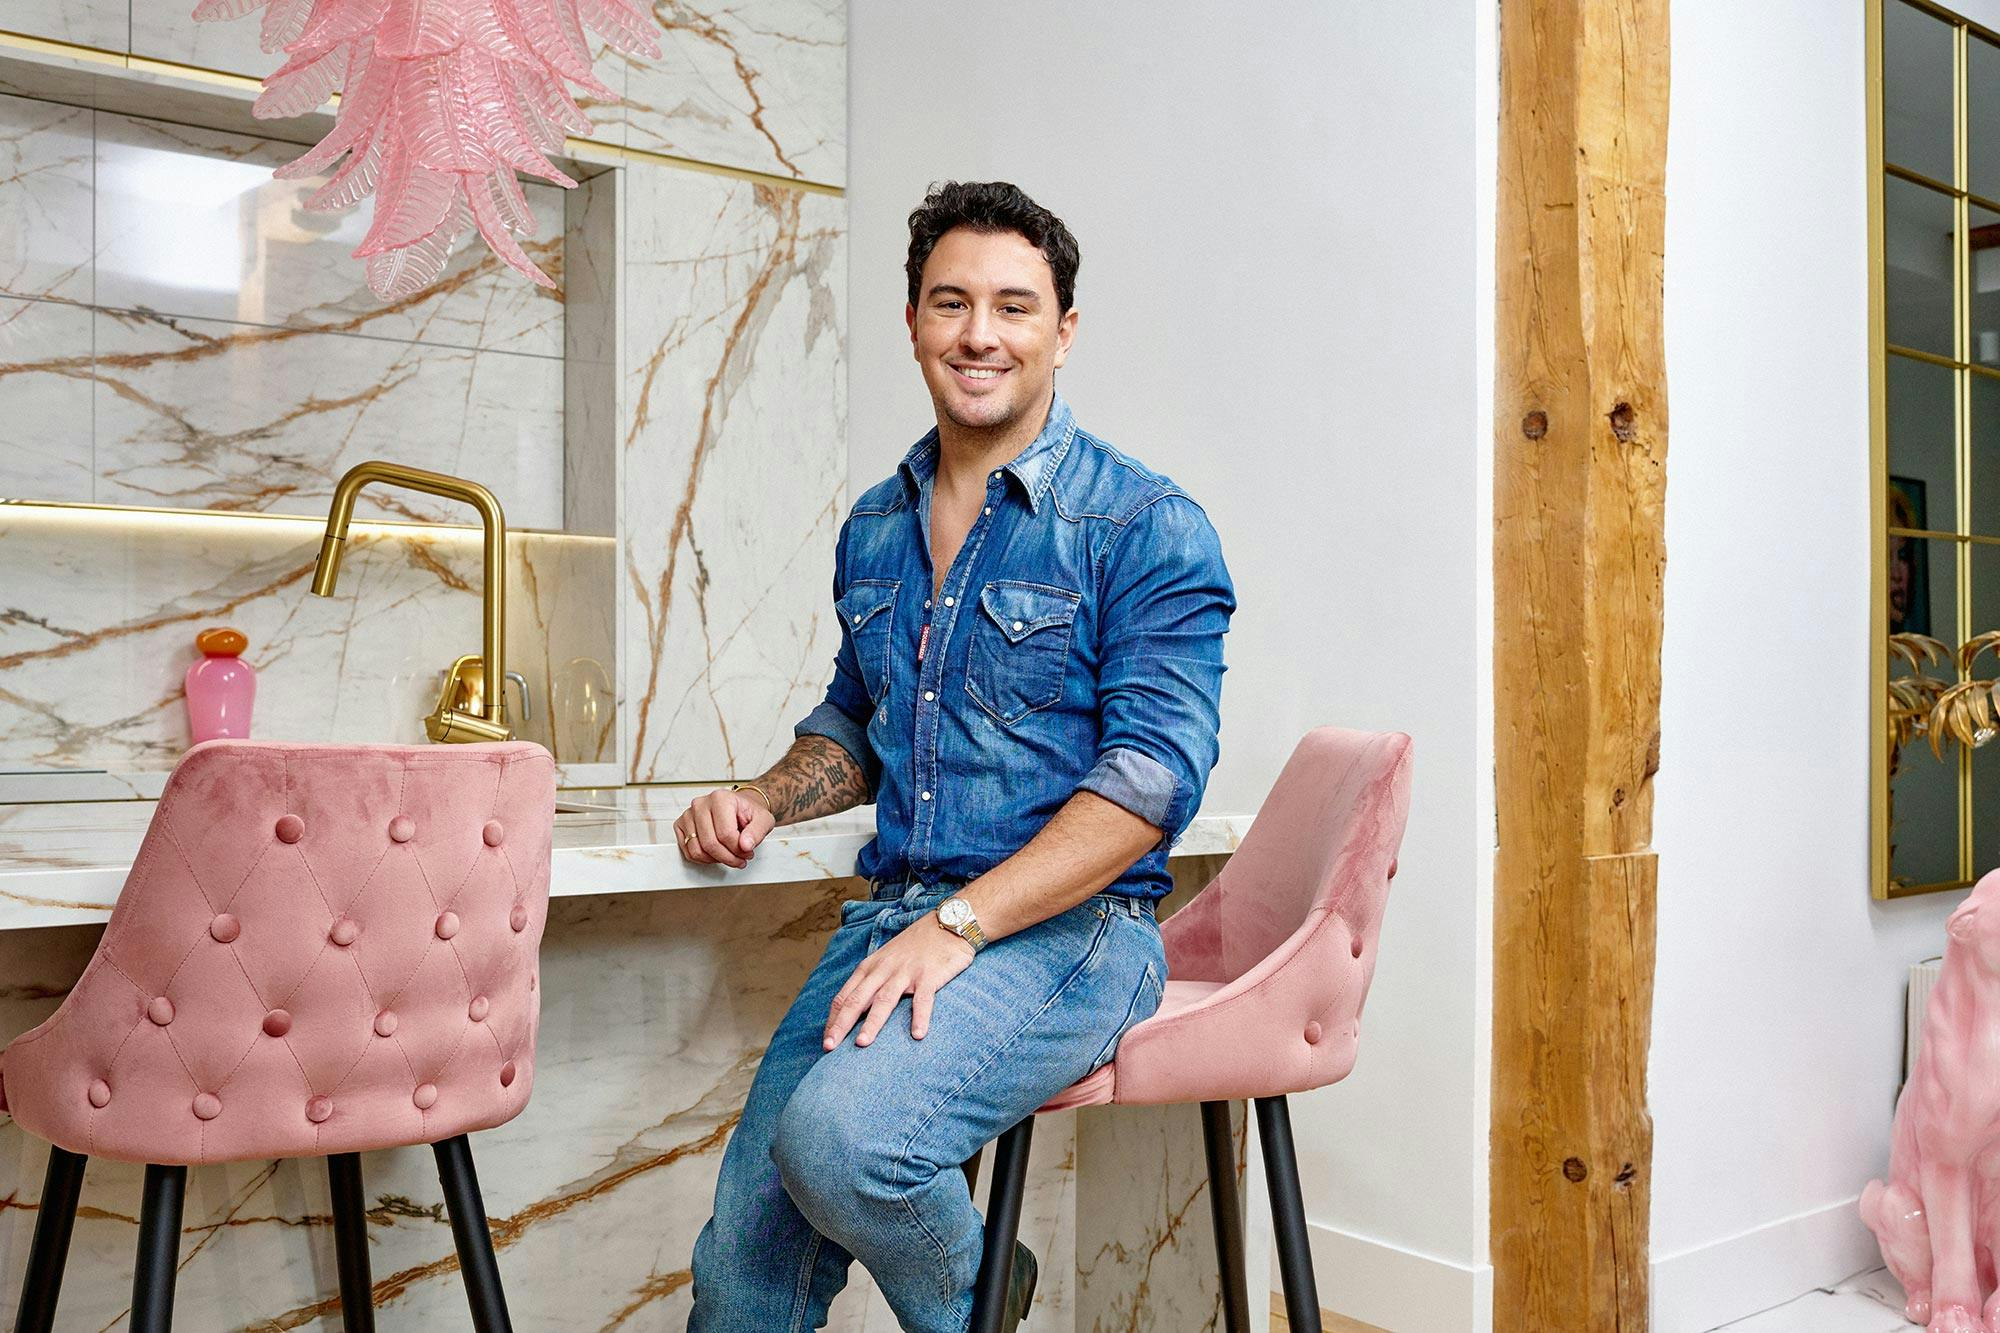 Imagem número 32 da actual secção de Stylist Víctor Blanco brings glamour to his home with touches of pink and gold combined with the power of Dekton da Cosentino Portugal